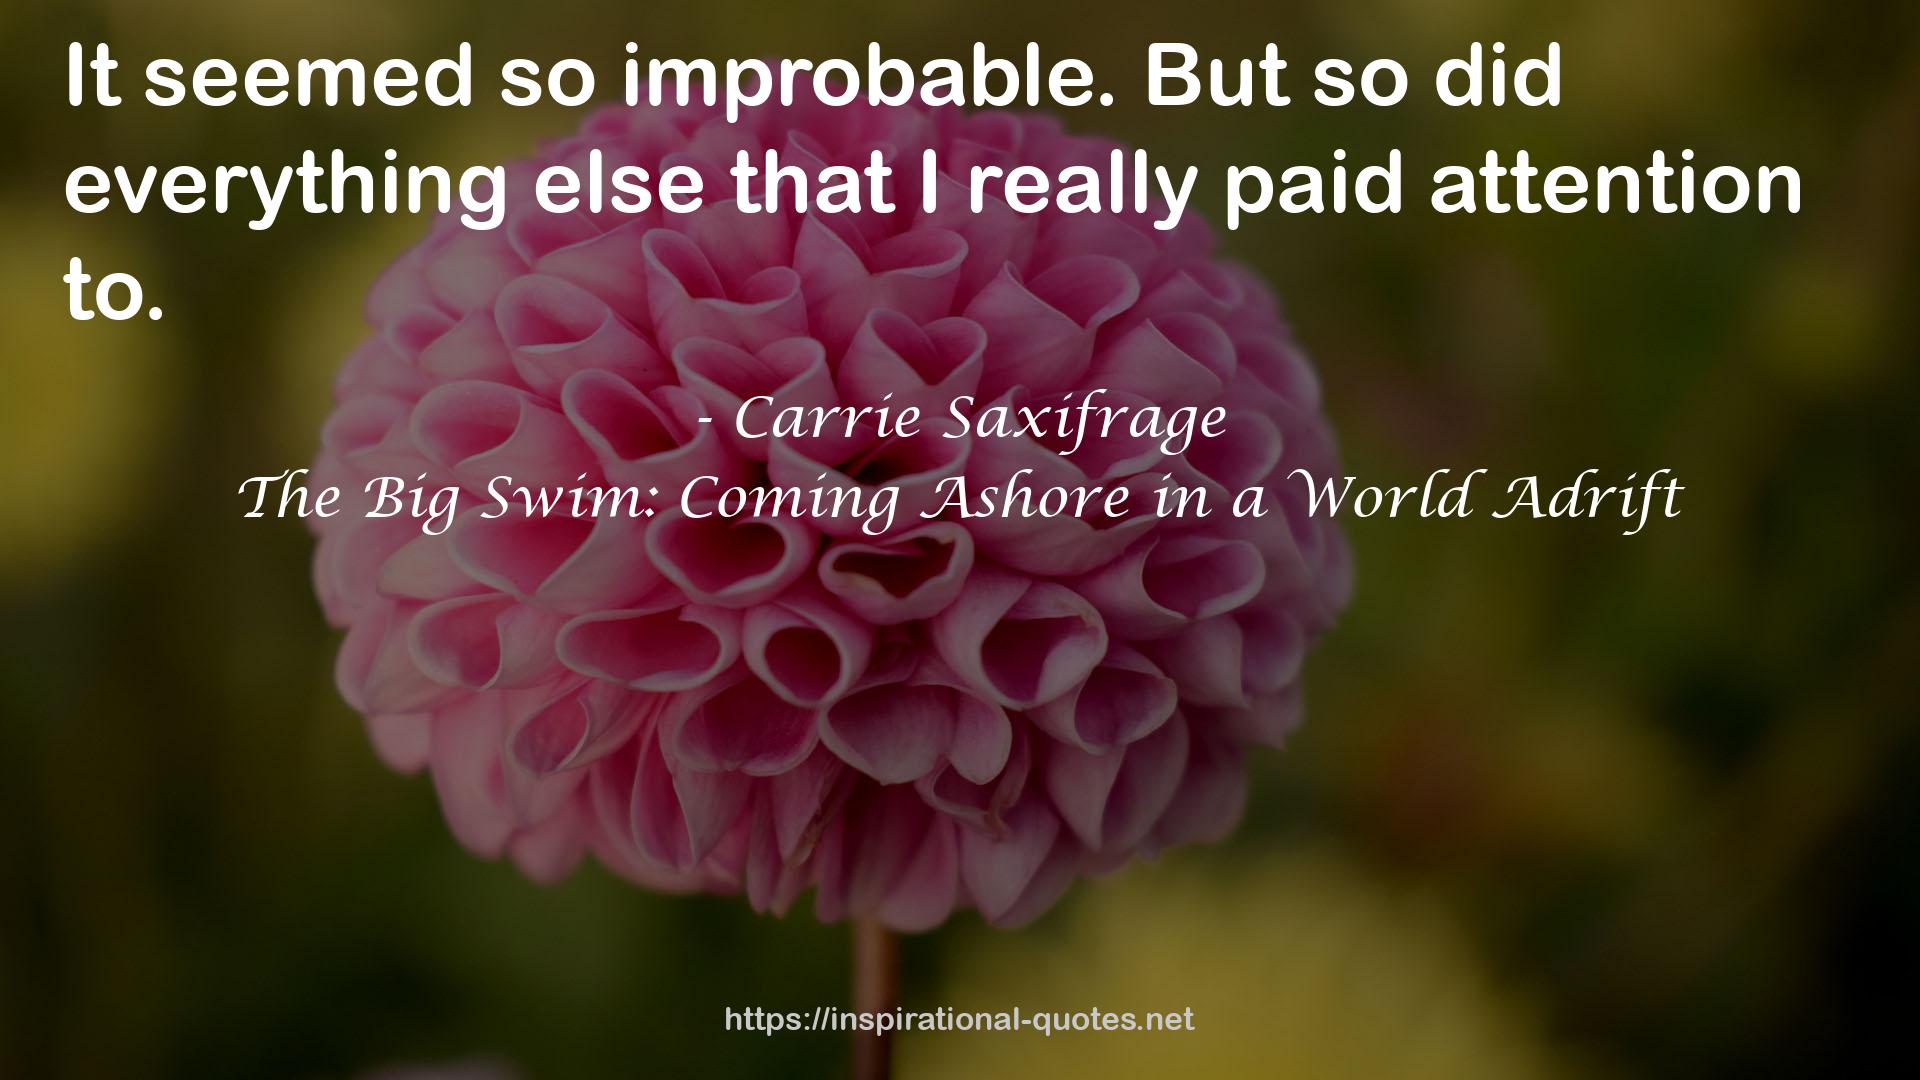 Carrie Saxifrage QUOTES